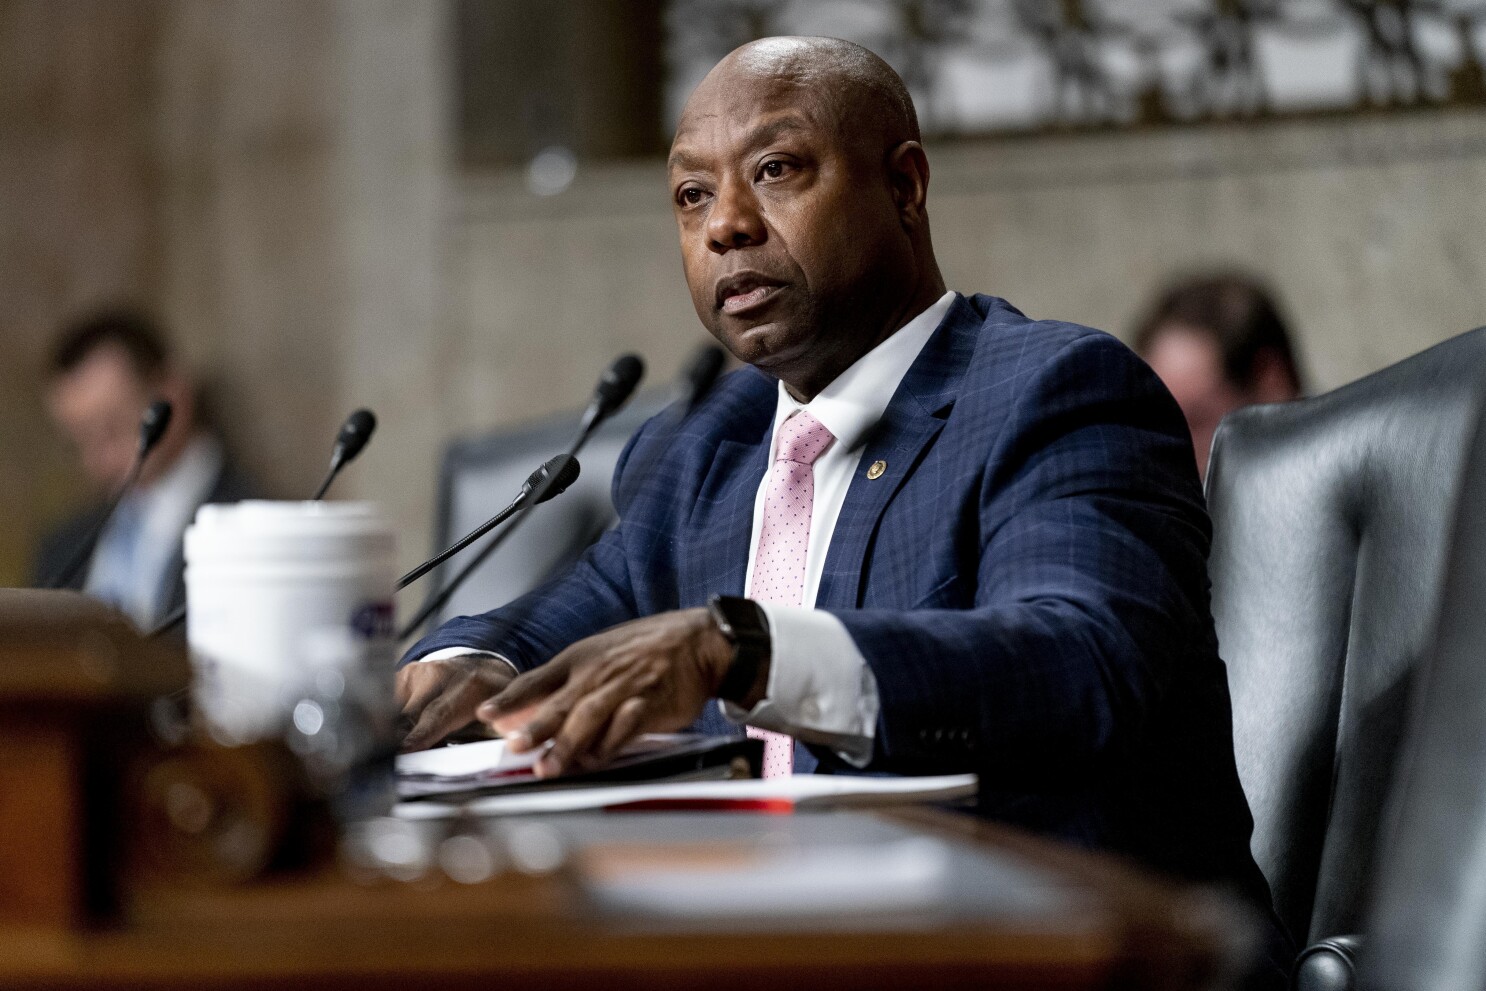 Sen. Tim Scott’s Memoir “America, A Redemption Story” to be Released in August